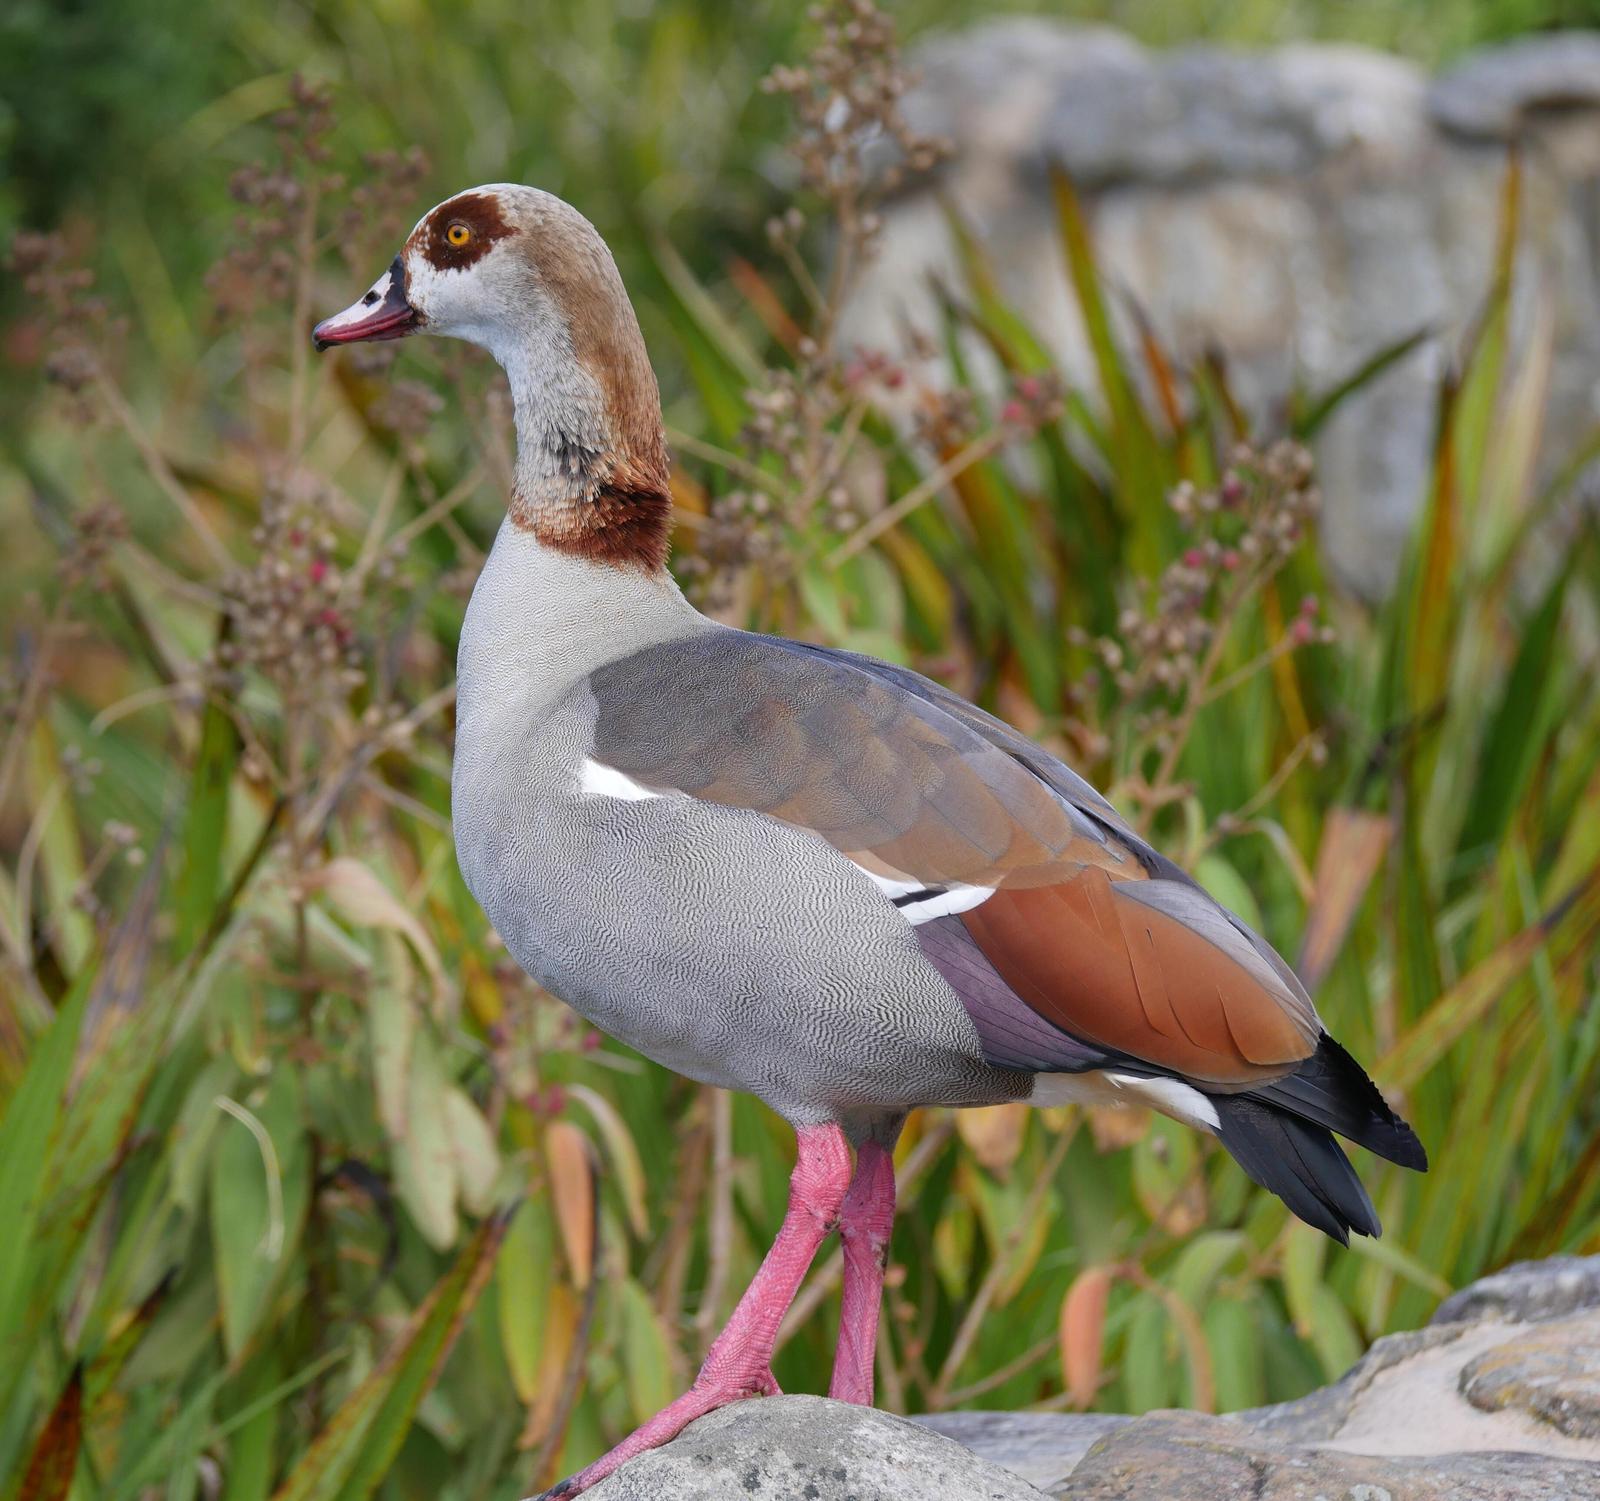 Egyptian Goose Photo by Peter Lowe